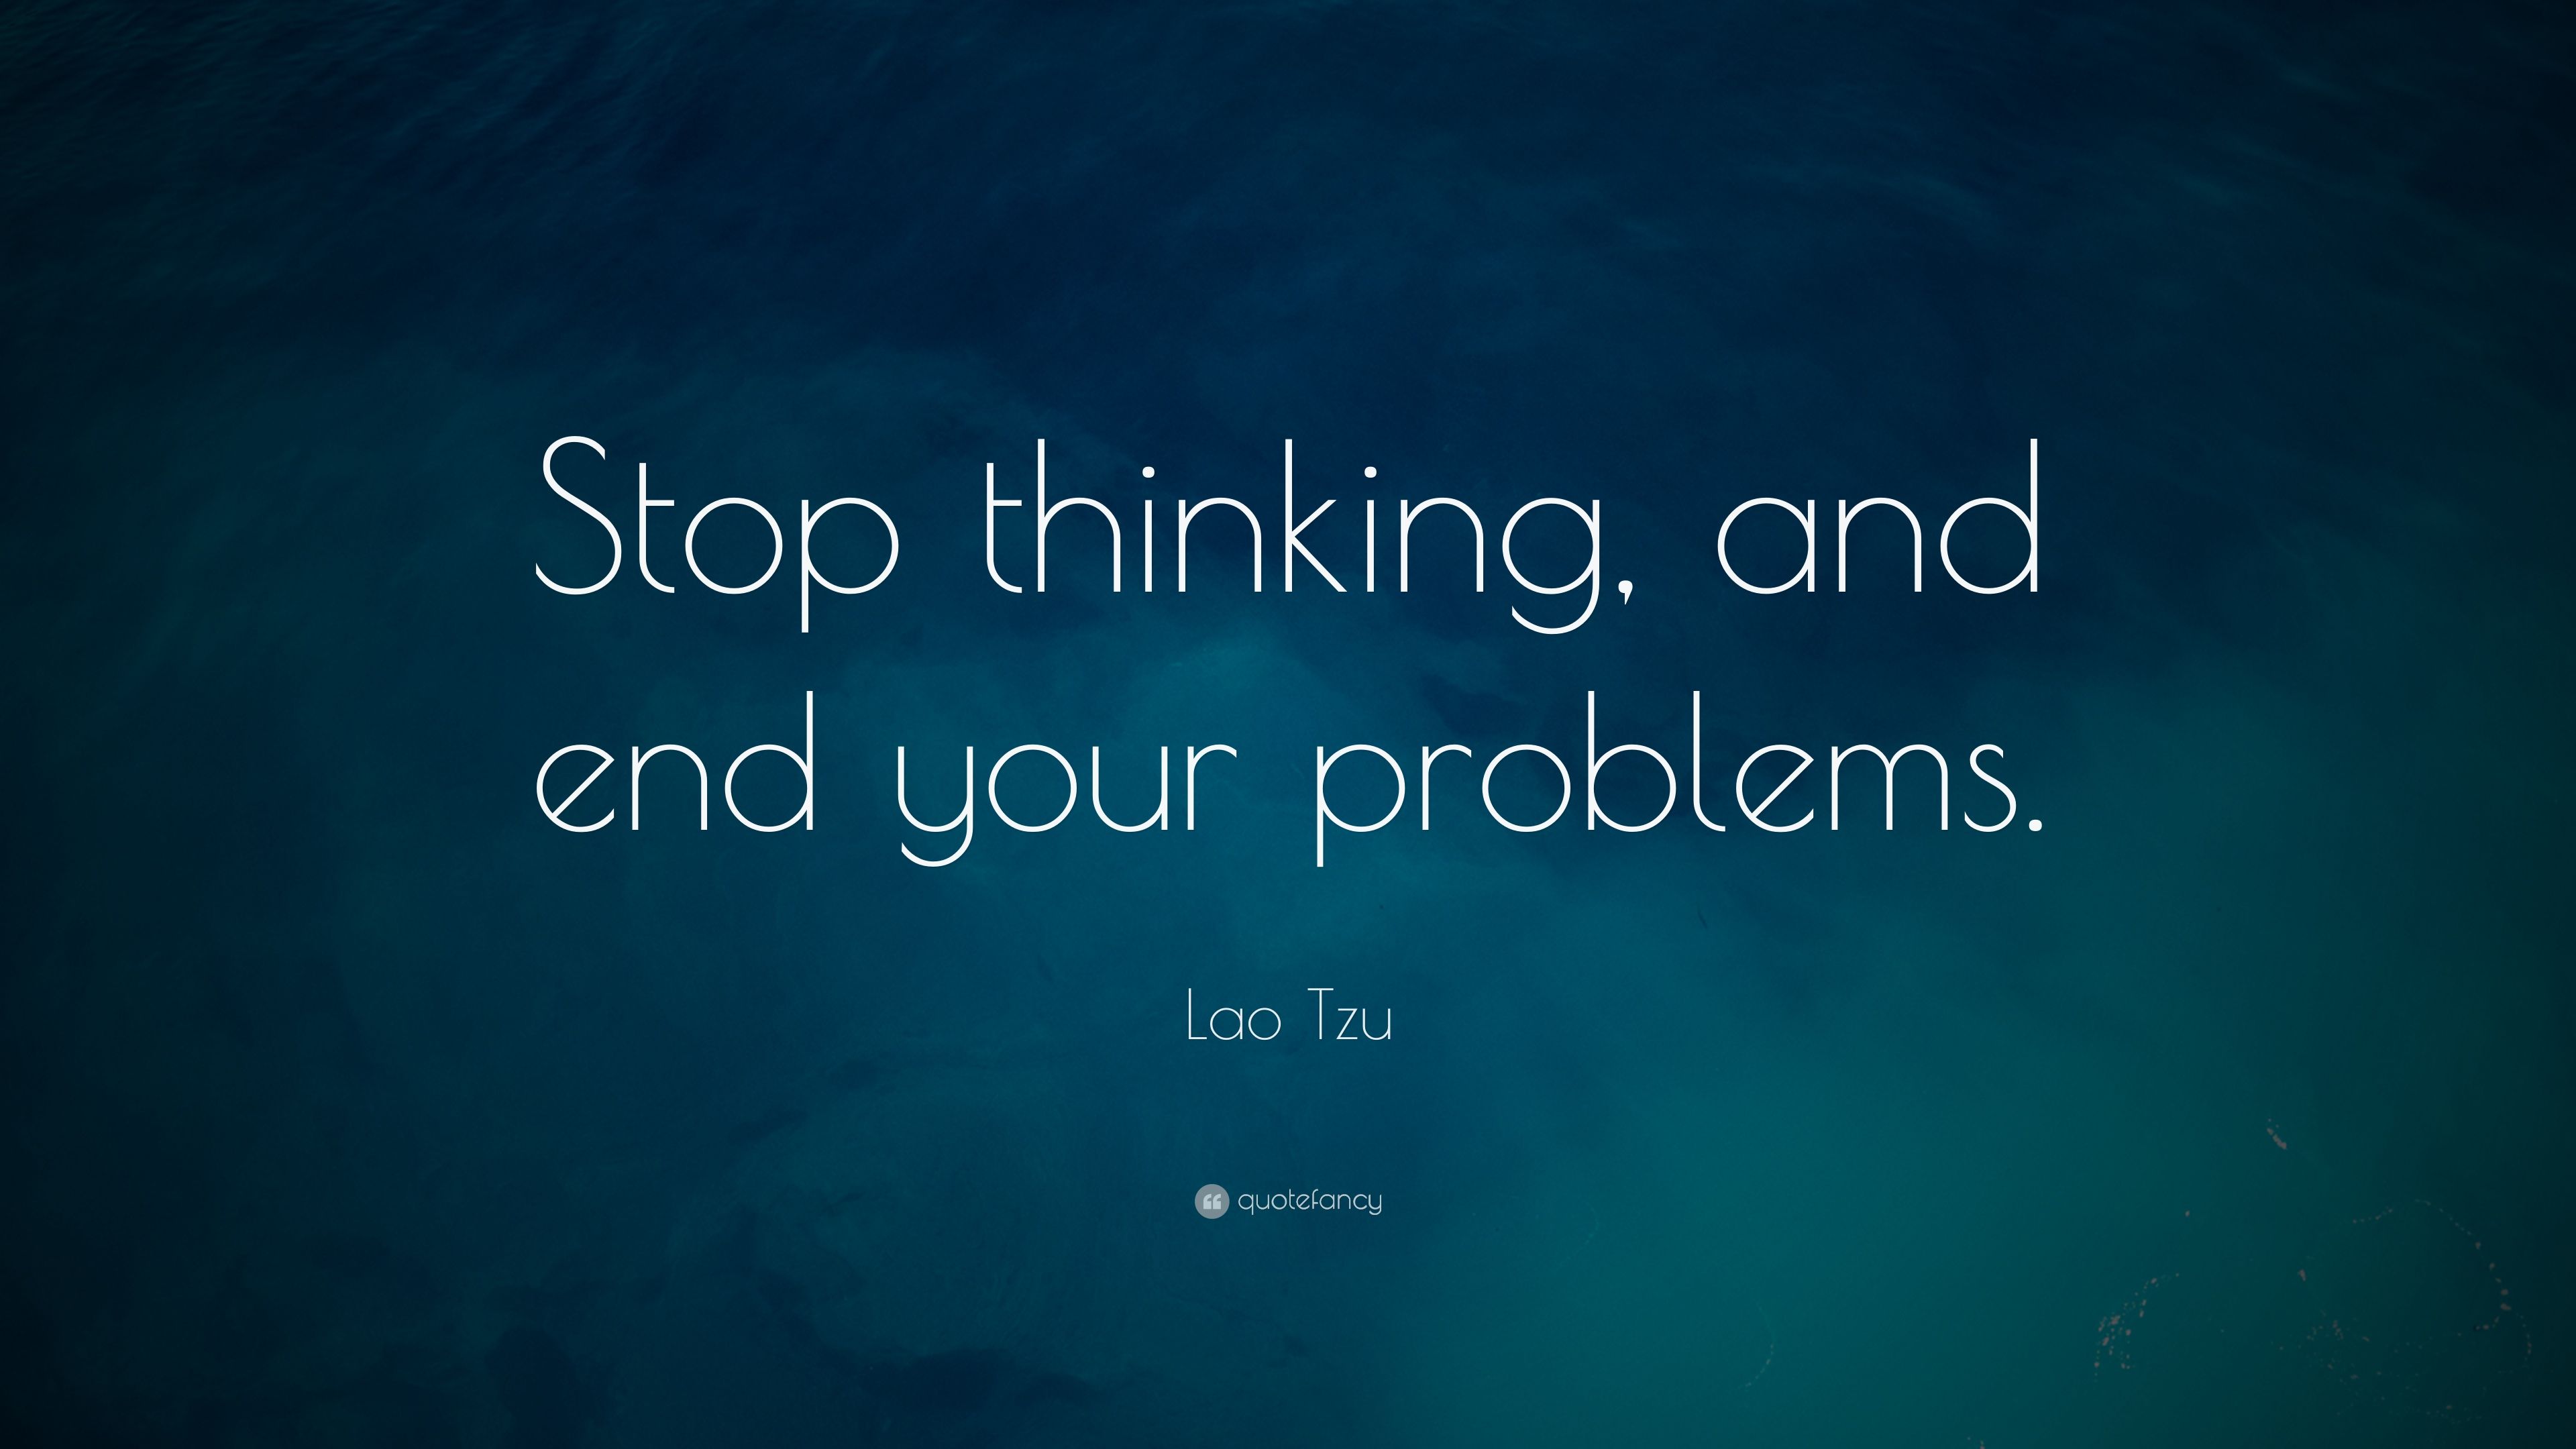 Lao Tzu Quote Stop thinking, and end your problems. 12